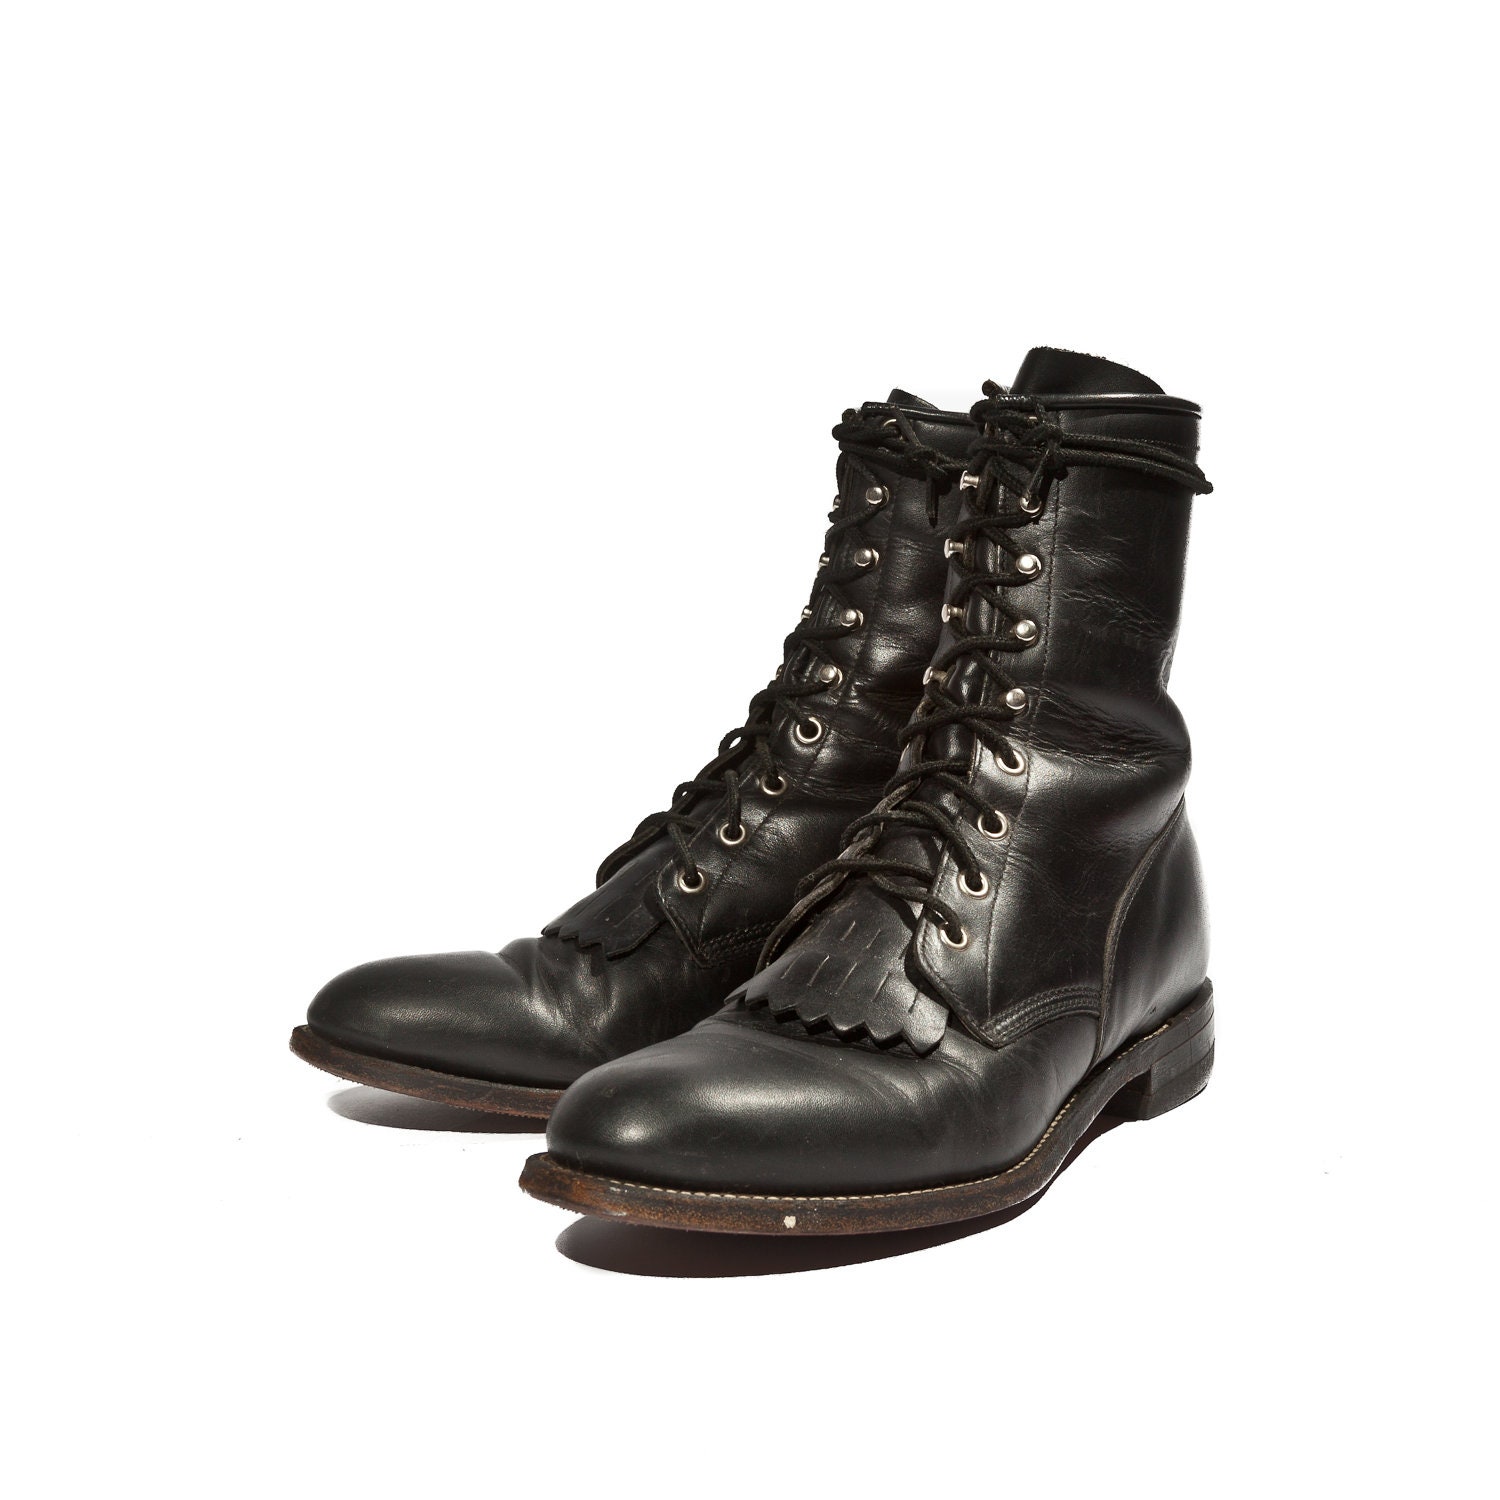 Men's Justin Roper Boot in Lace Up Black Leather with